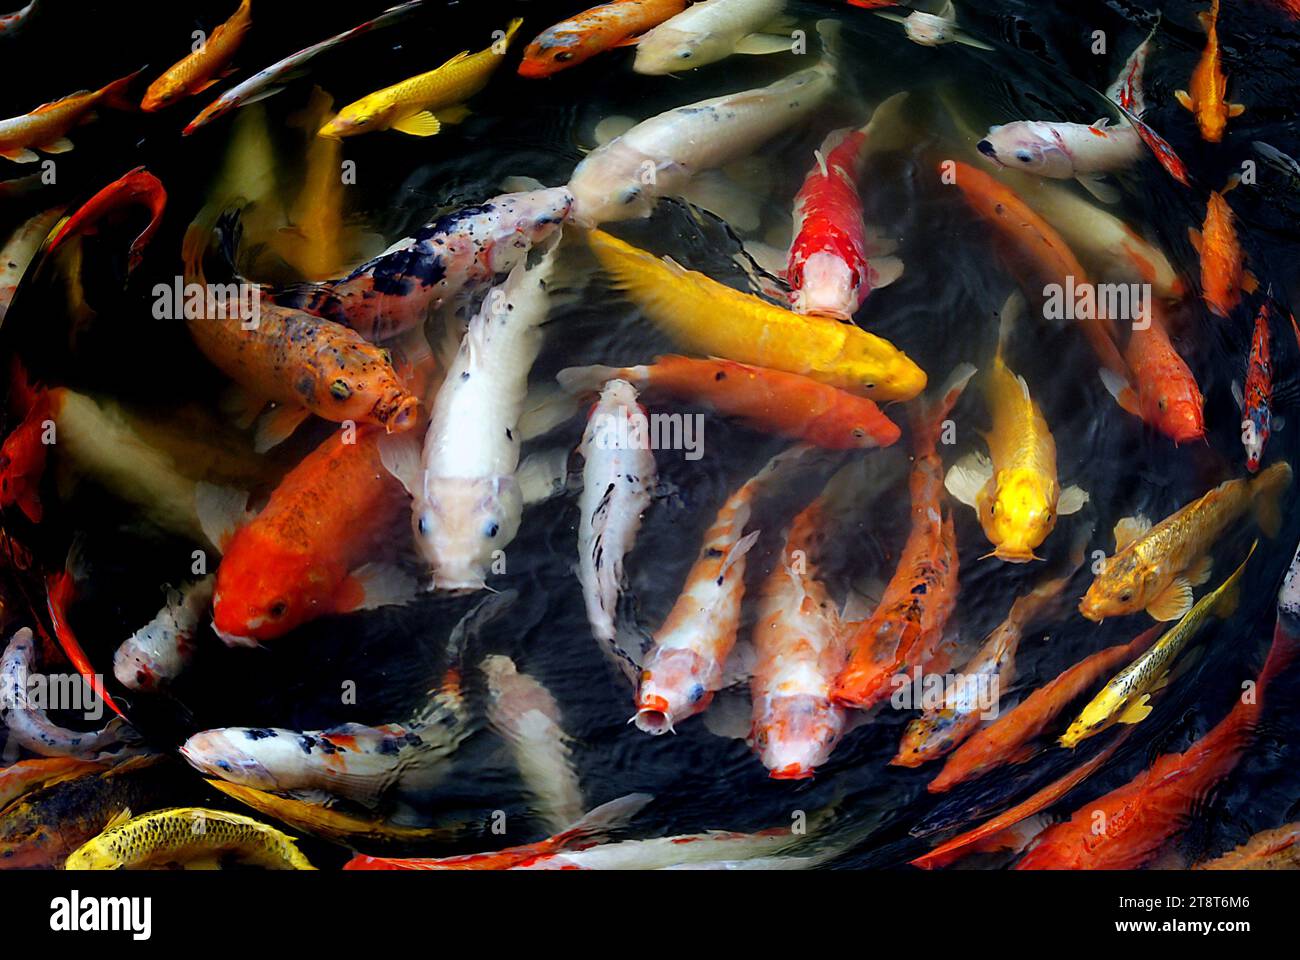 Fresh water fishermen's bait tray for pond fishing for silver fish and carp  Stock Photo - Alamy